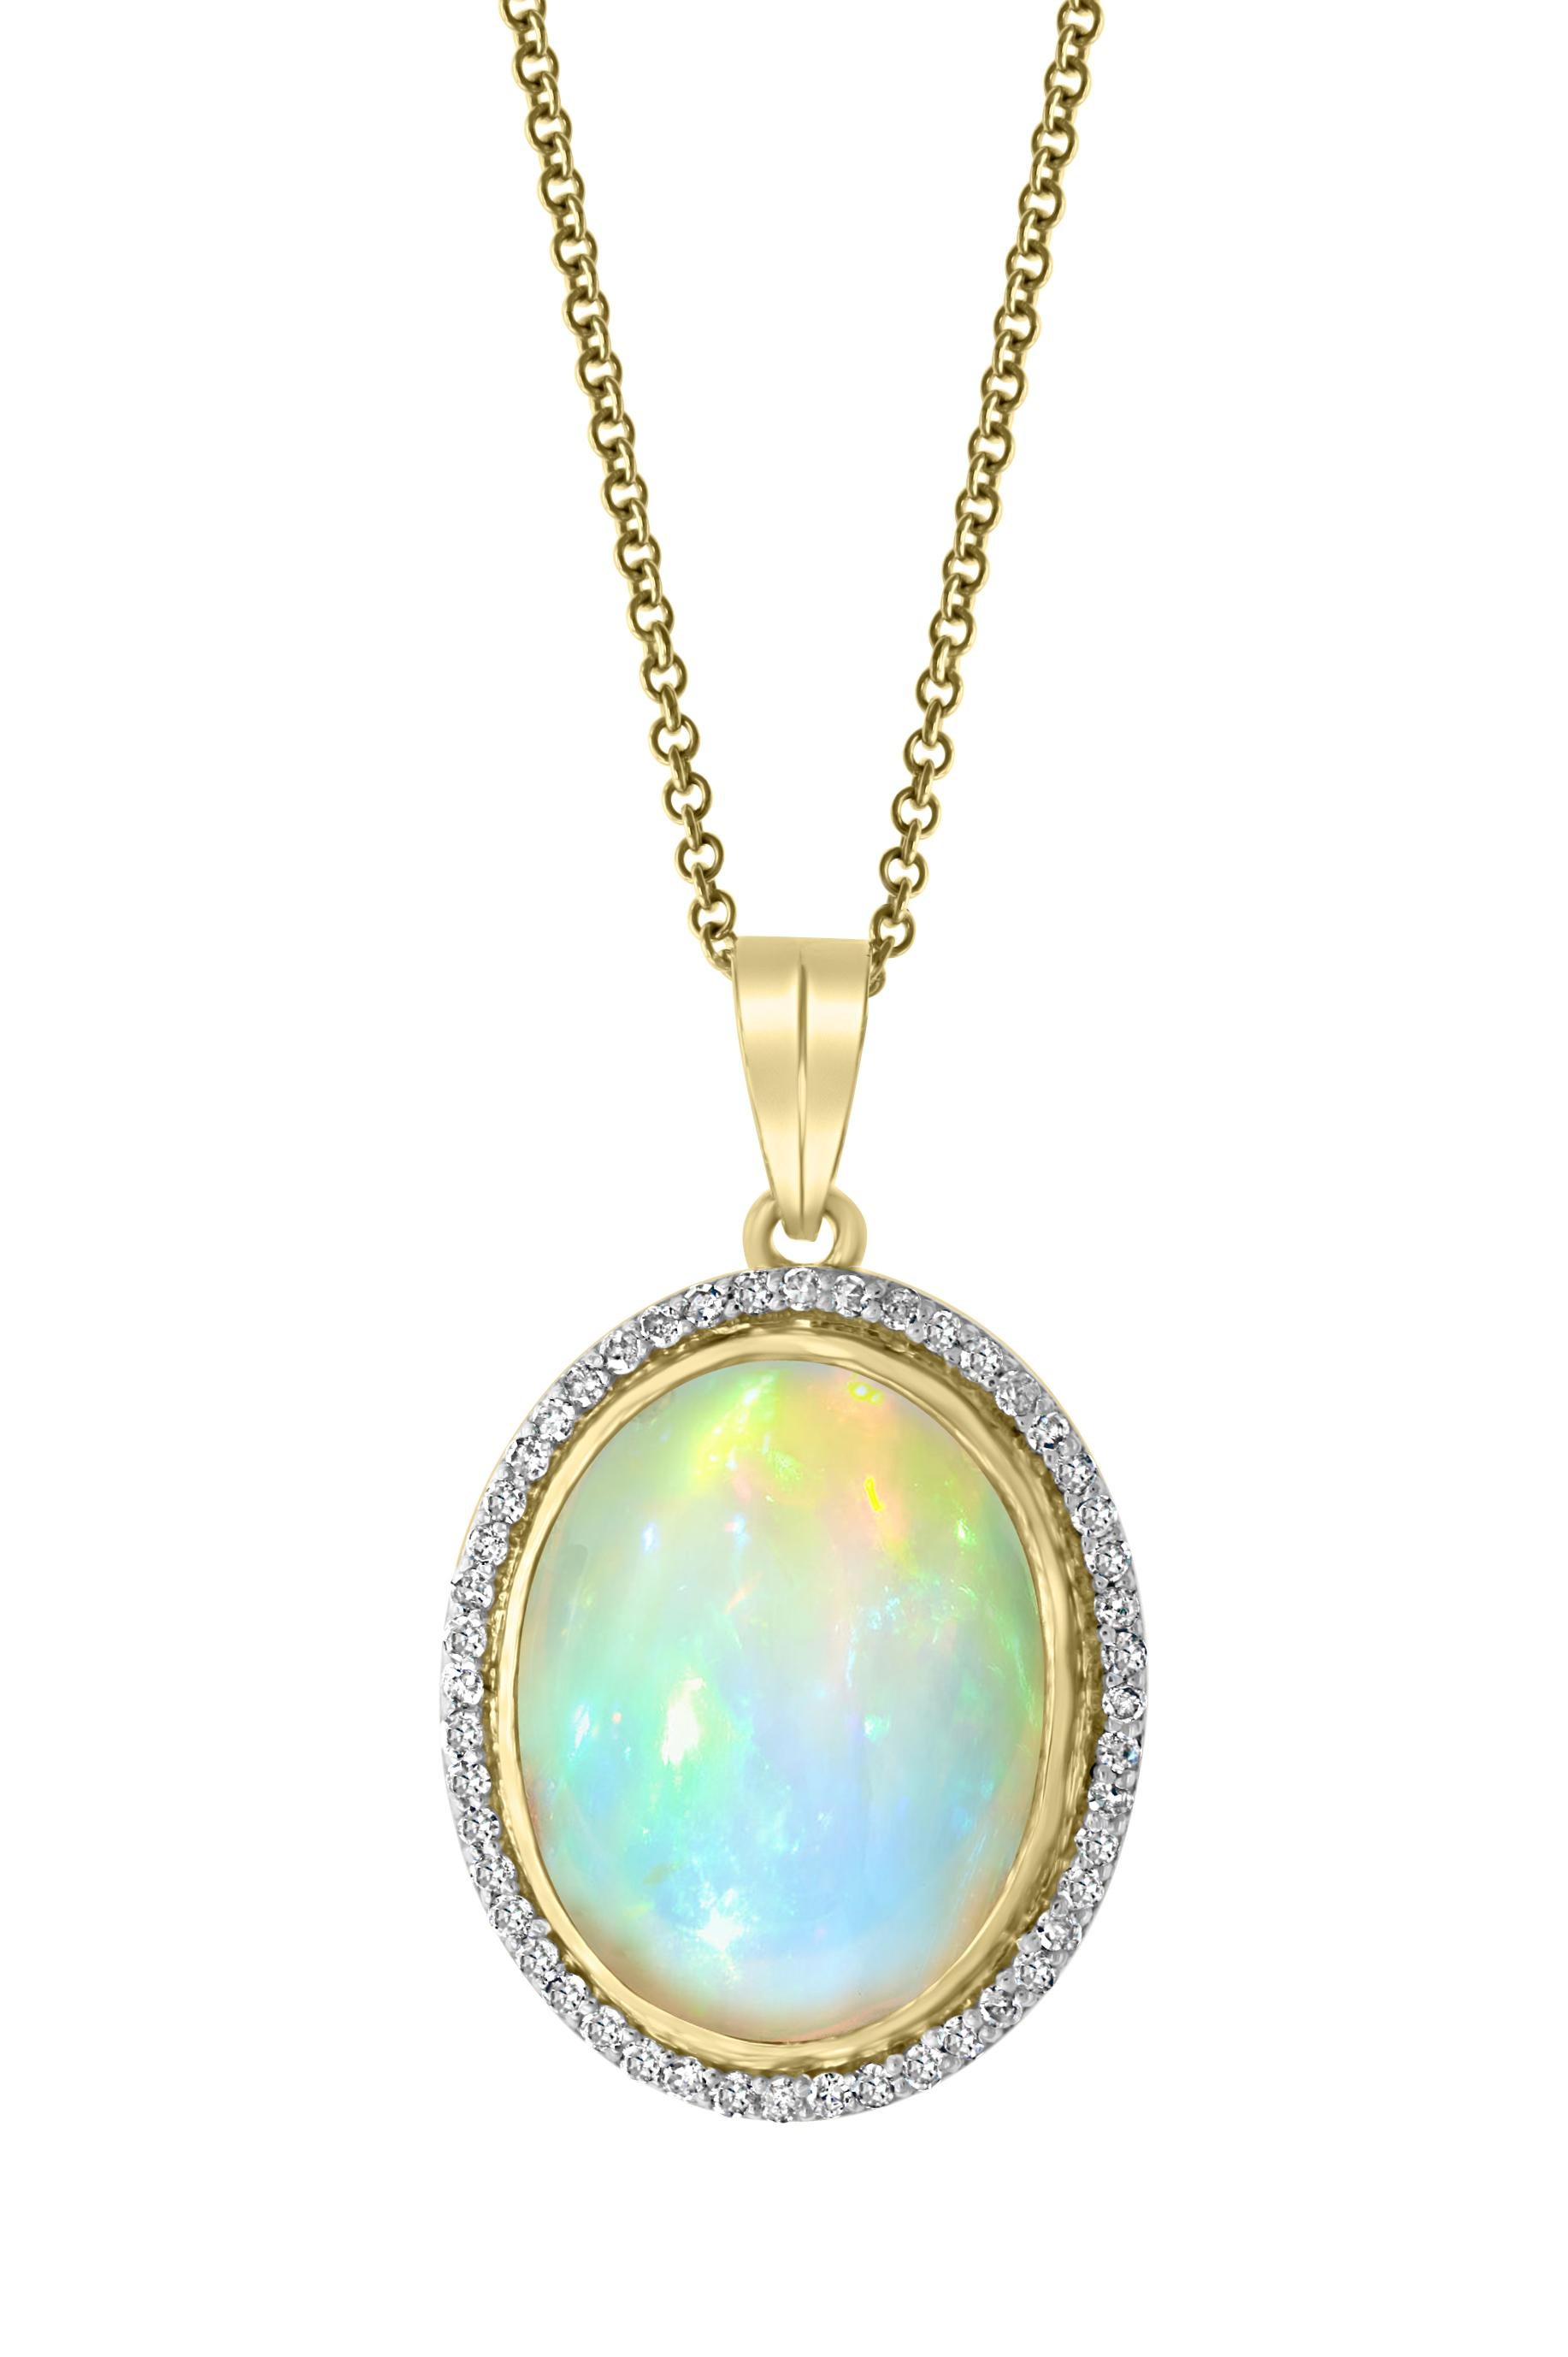 14 Carat Oval Ethiopian  Opal &  Diamond Pendant /  Necklace 18 Kt Gold Necklace
This spectacular Pendant Necklace consisting of a single Oval Shape Ethiopian Opal Approximately 14 Carat. The Opal is surrounded by approximately 1.0 Carats of